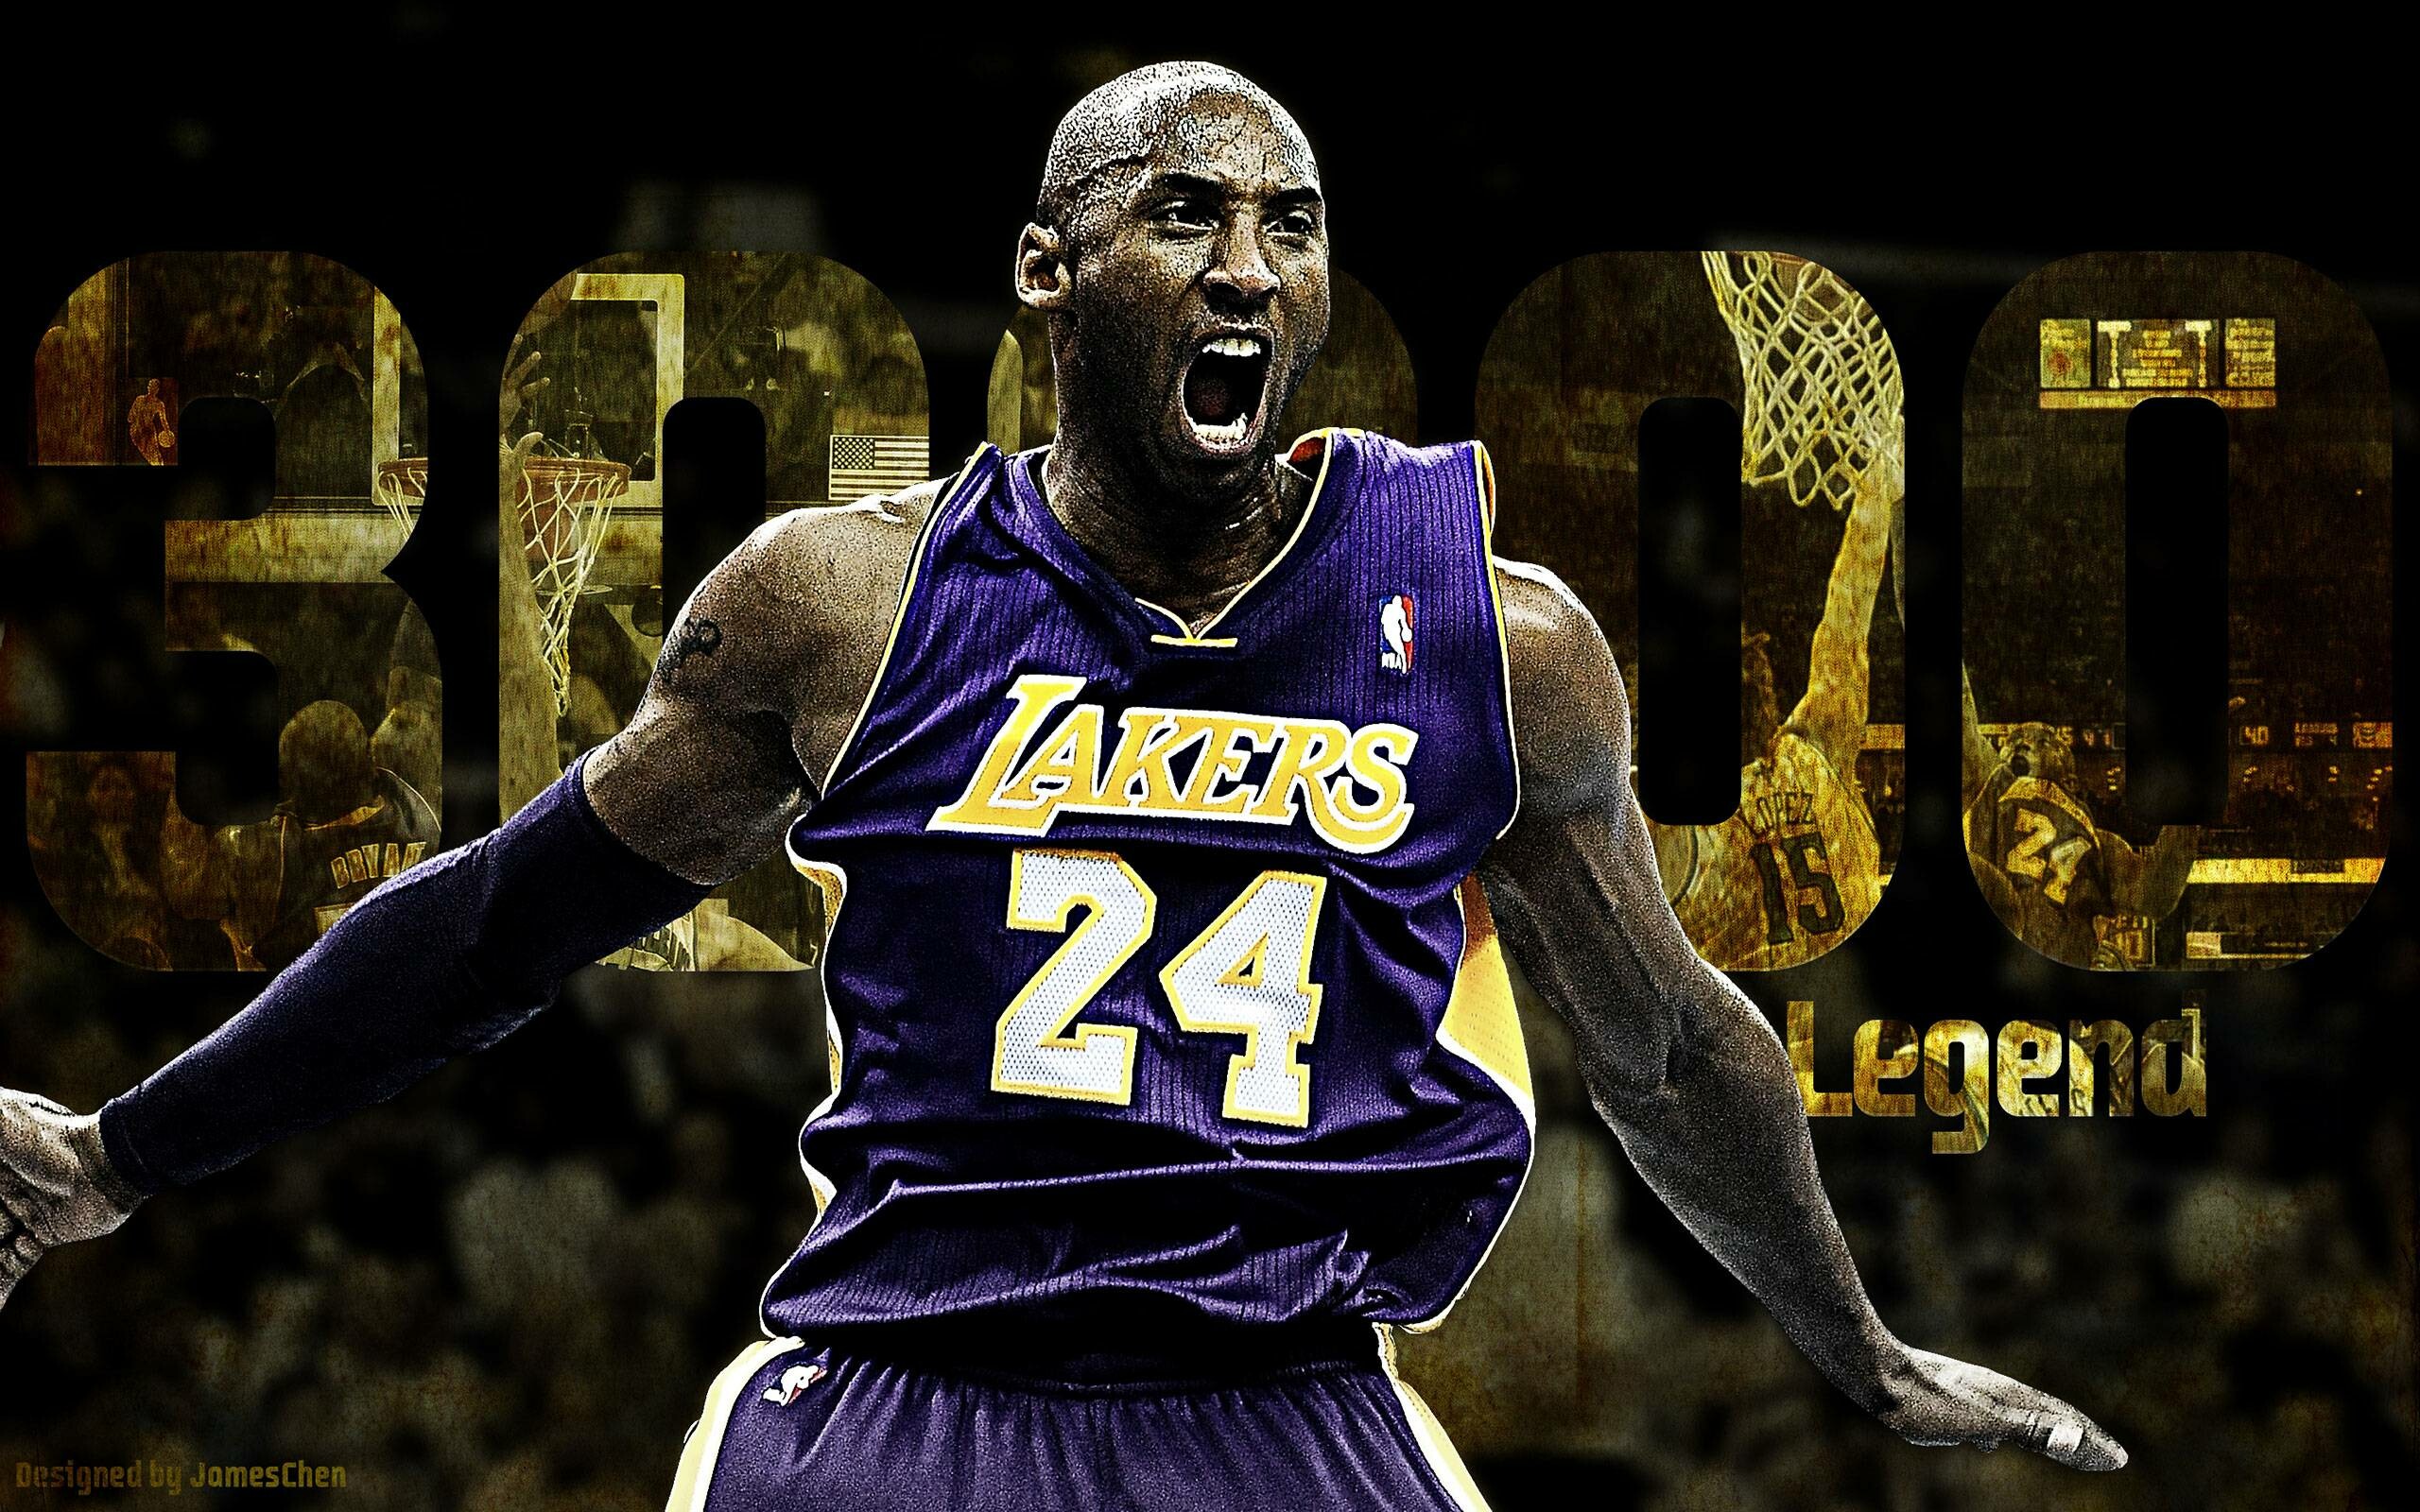 Kobe Bryant Wallpaper: HD, 4K, 5K for PC and Mobile. Download free image for iPhone, Android